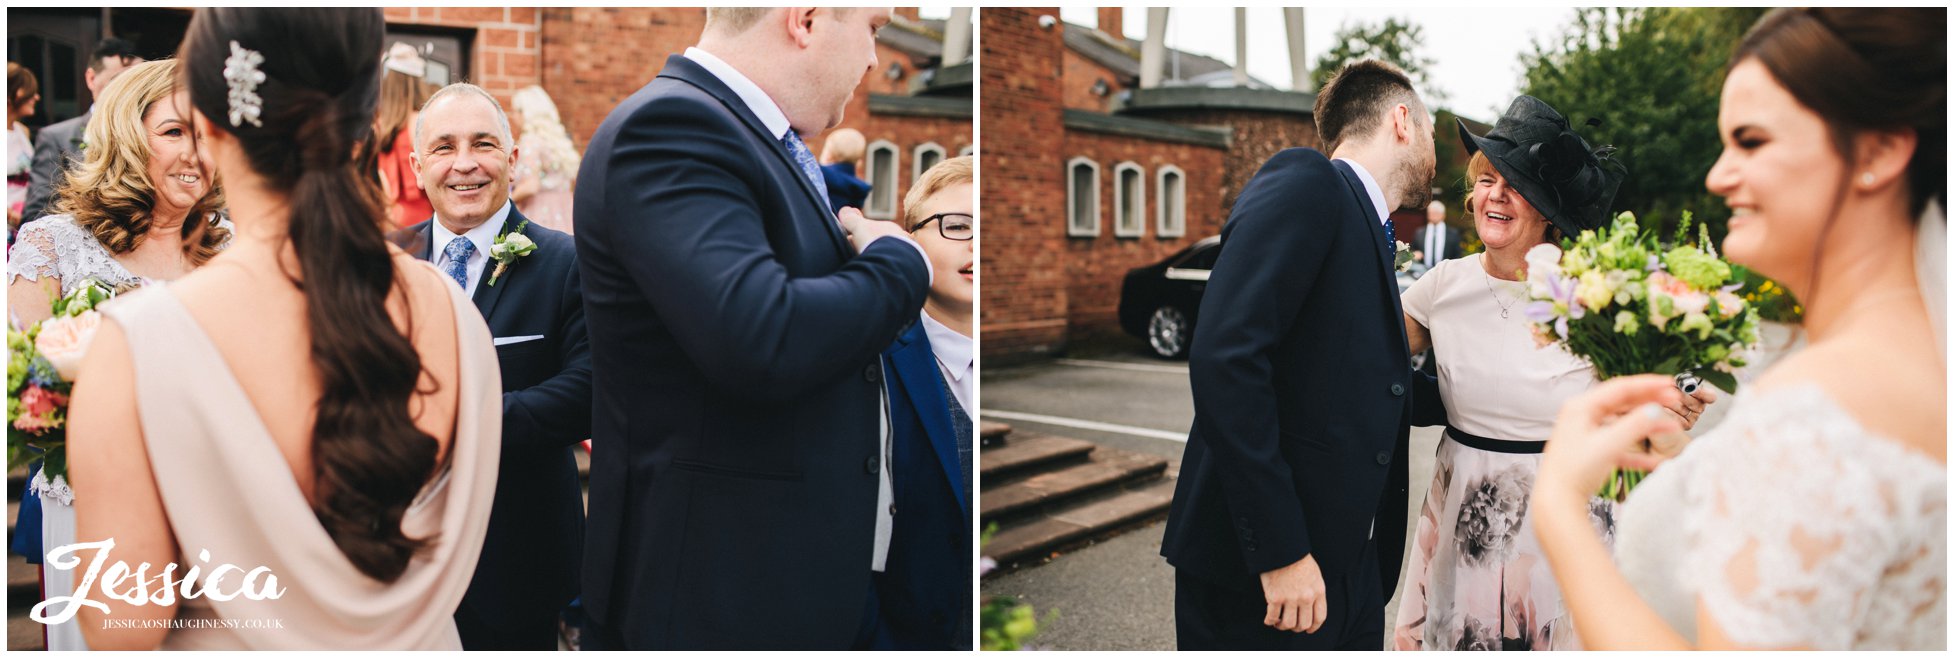 guests congratulate the newly wed's - liverpool wedding photographer